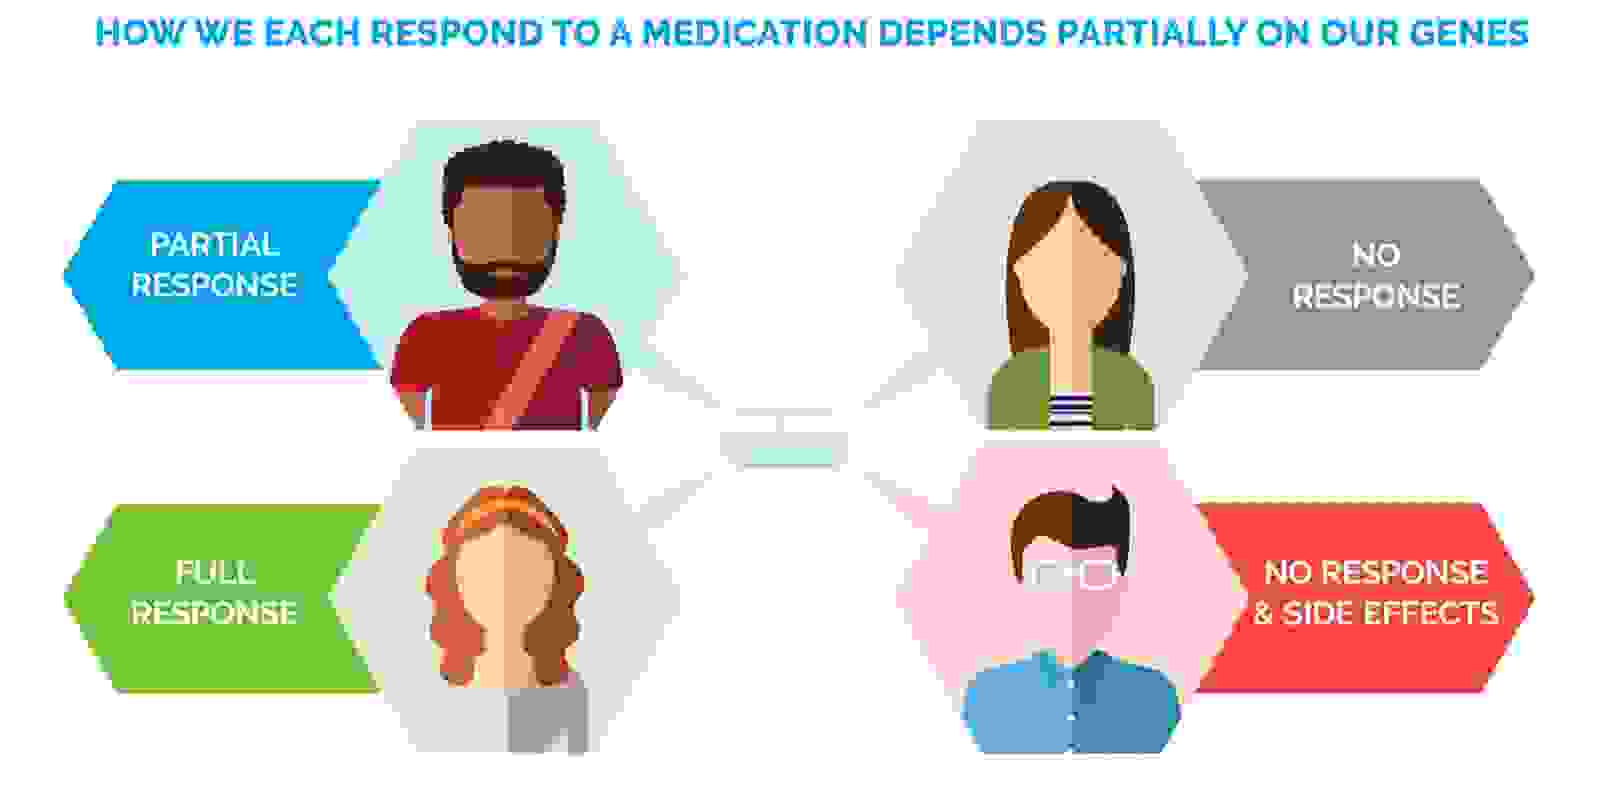 We all respond to medications differently.